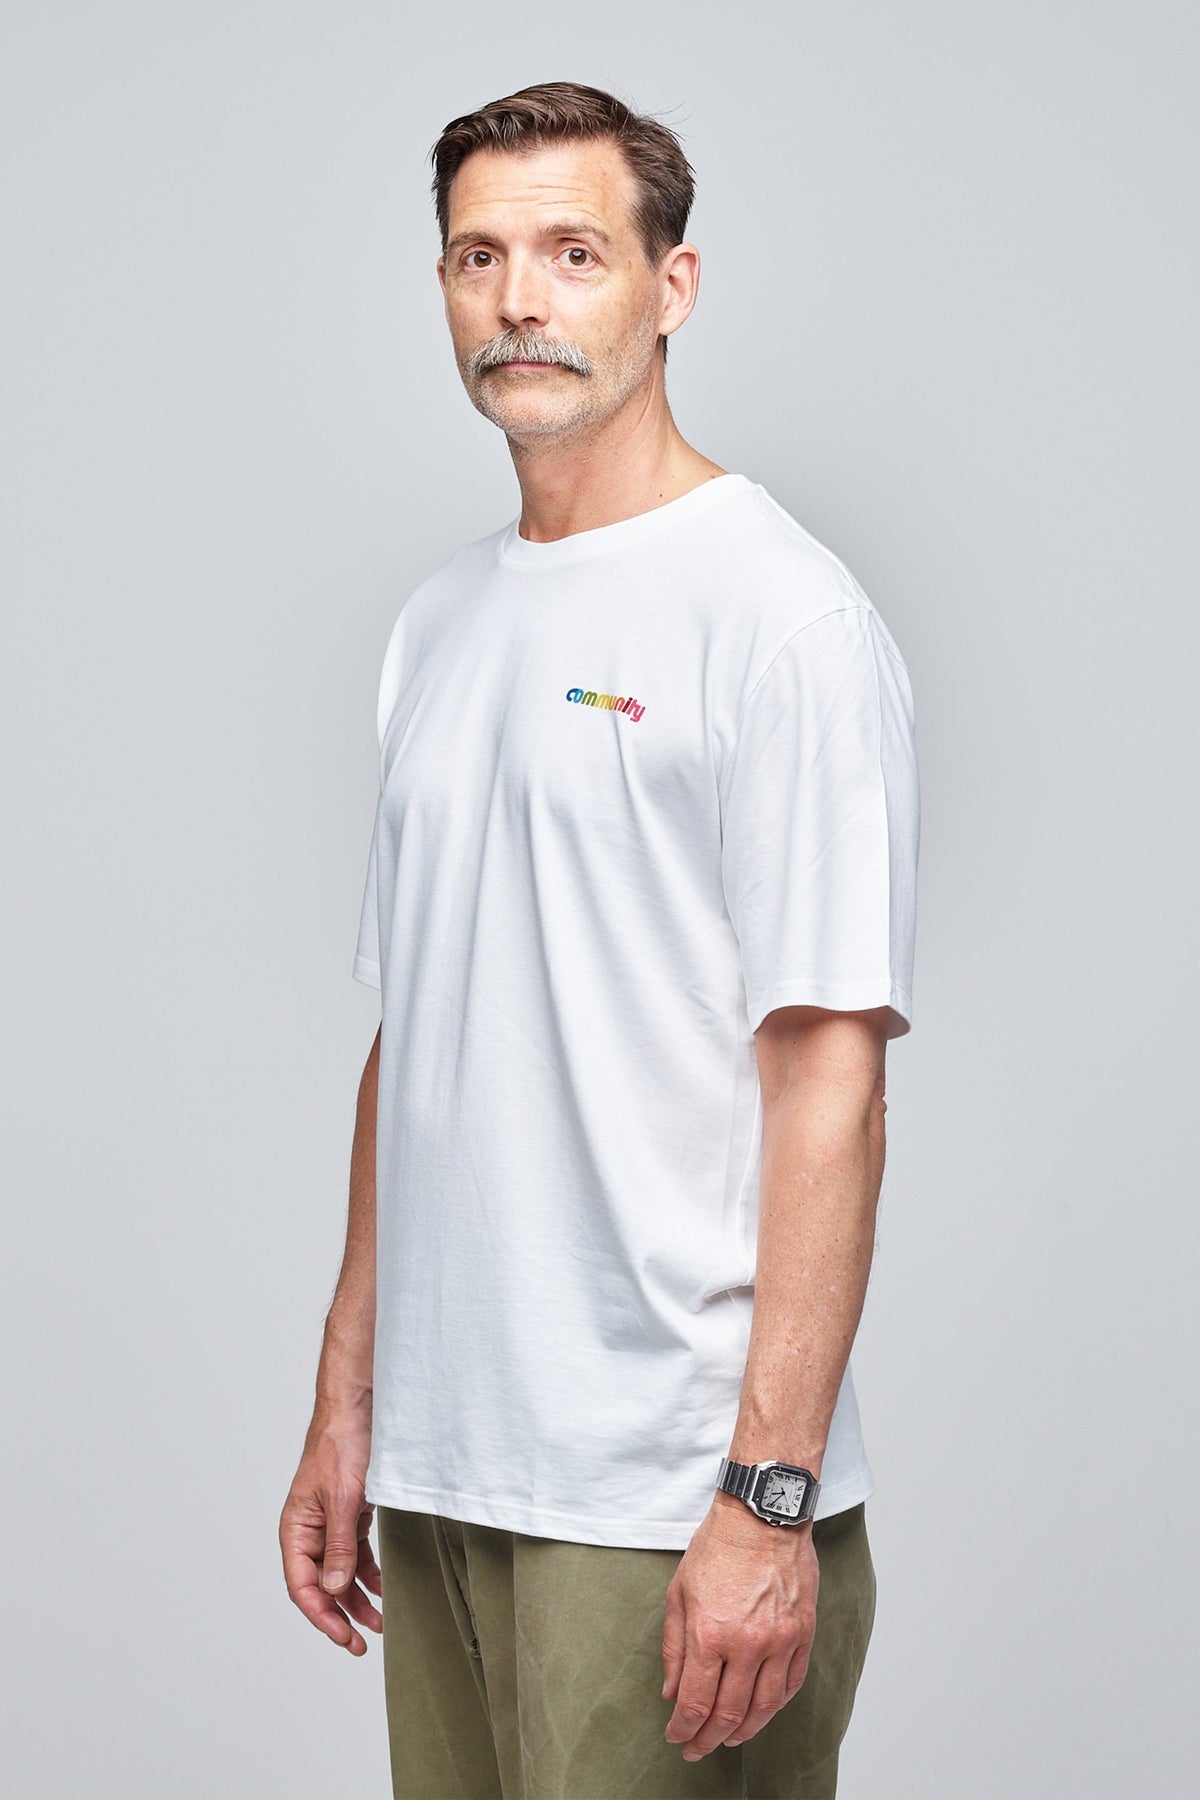 
            Community Clothing founder, Patrick Grant, wearing a white short sleeve t-shirt with branding on the chest. Styled untucked